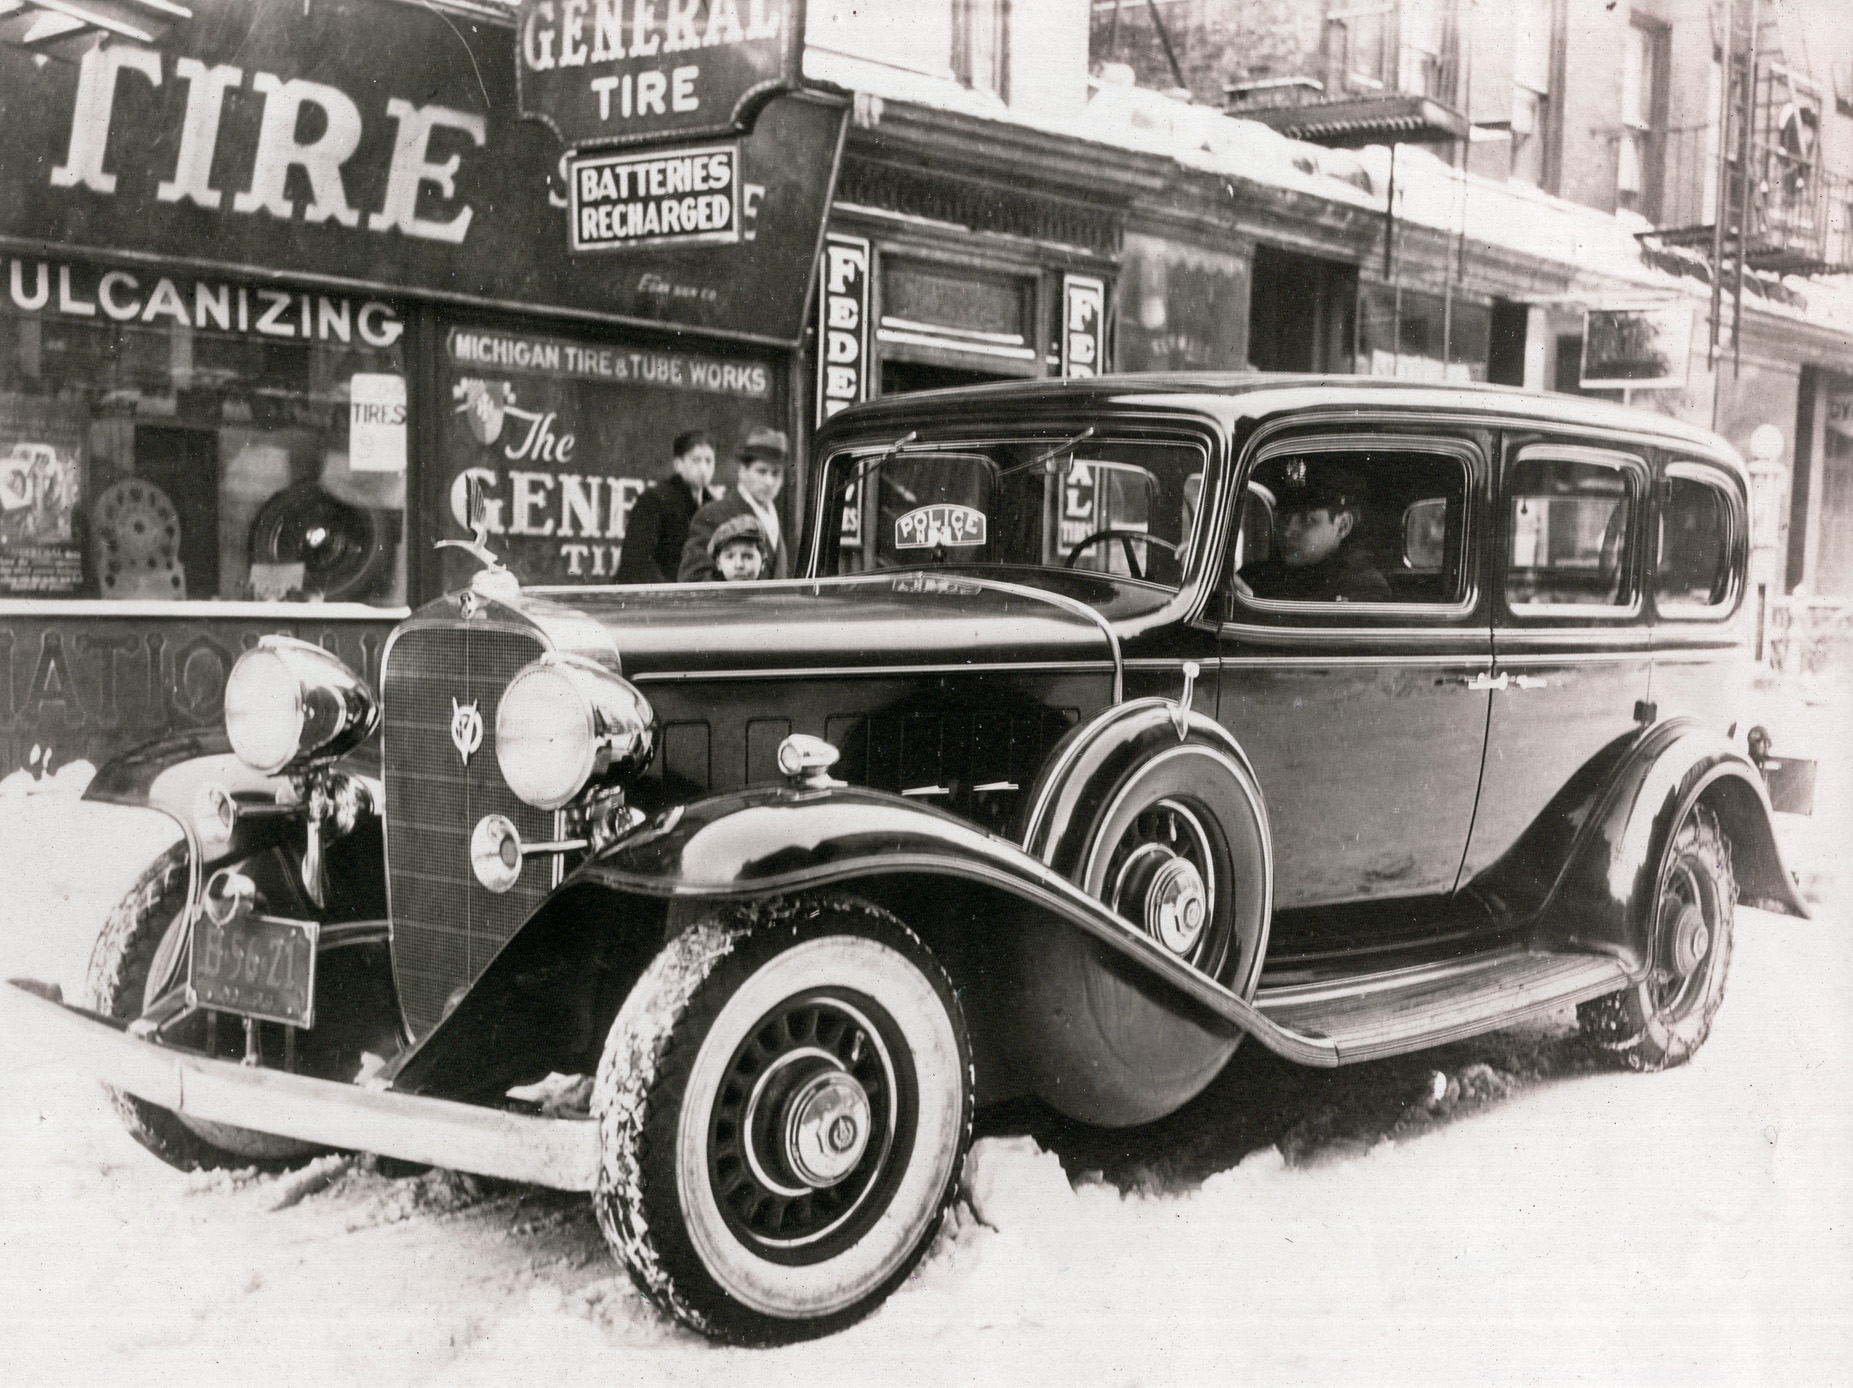 Back of photo has typed: "A-550-9, NEW YORK CITY- Police Commissioner's Car Showing Insignia. Received from New York March 1, 1934."

Below that are two rubber stamps: a blue one: "Warner Bros. Pictures Inc Burbank, Calif. Property of Research Department" which is crossed out, and above it a purple stamp: "Columbia Pictures Corporation Research Department." View full size.